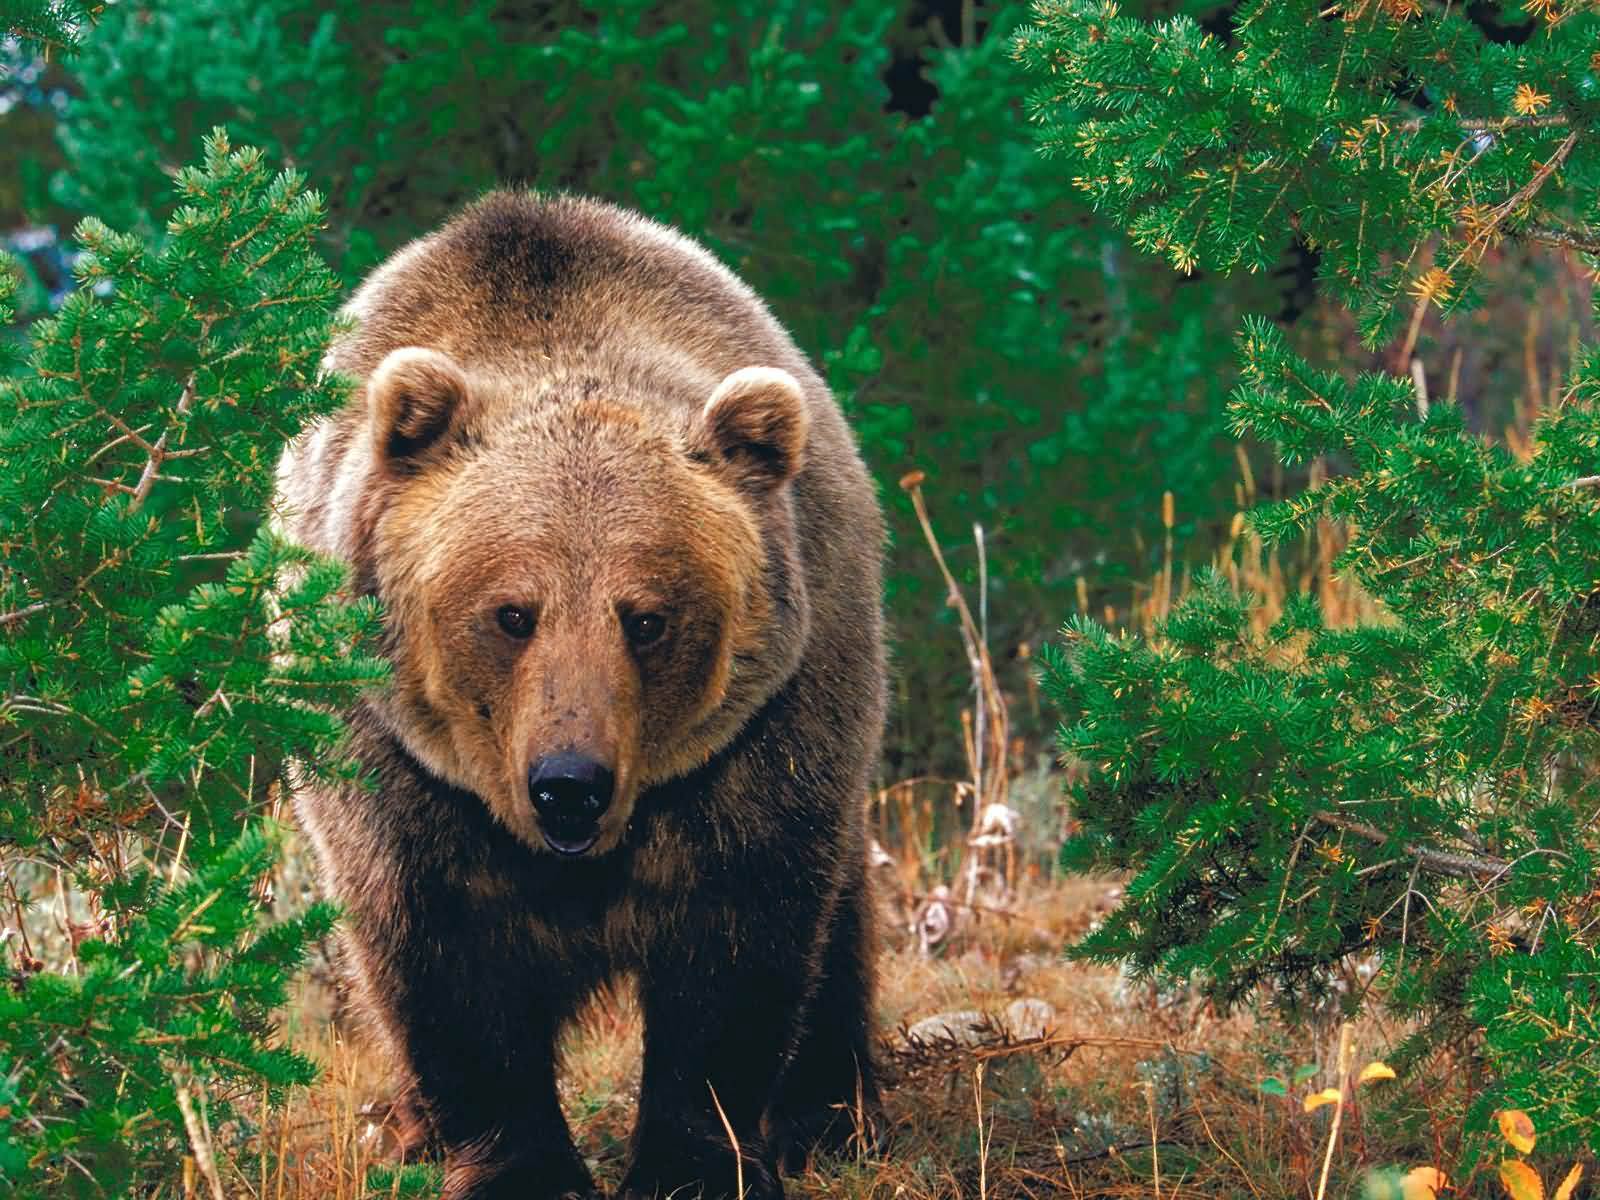 Free Grizzly Bear Wallpaper download